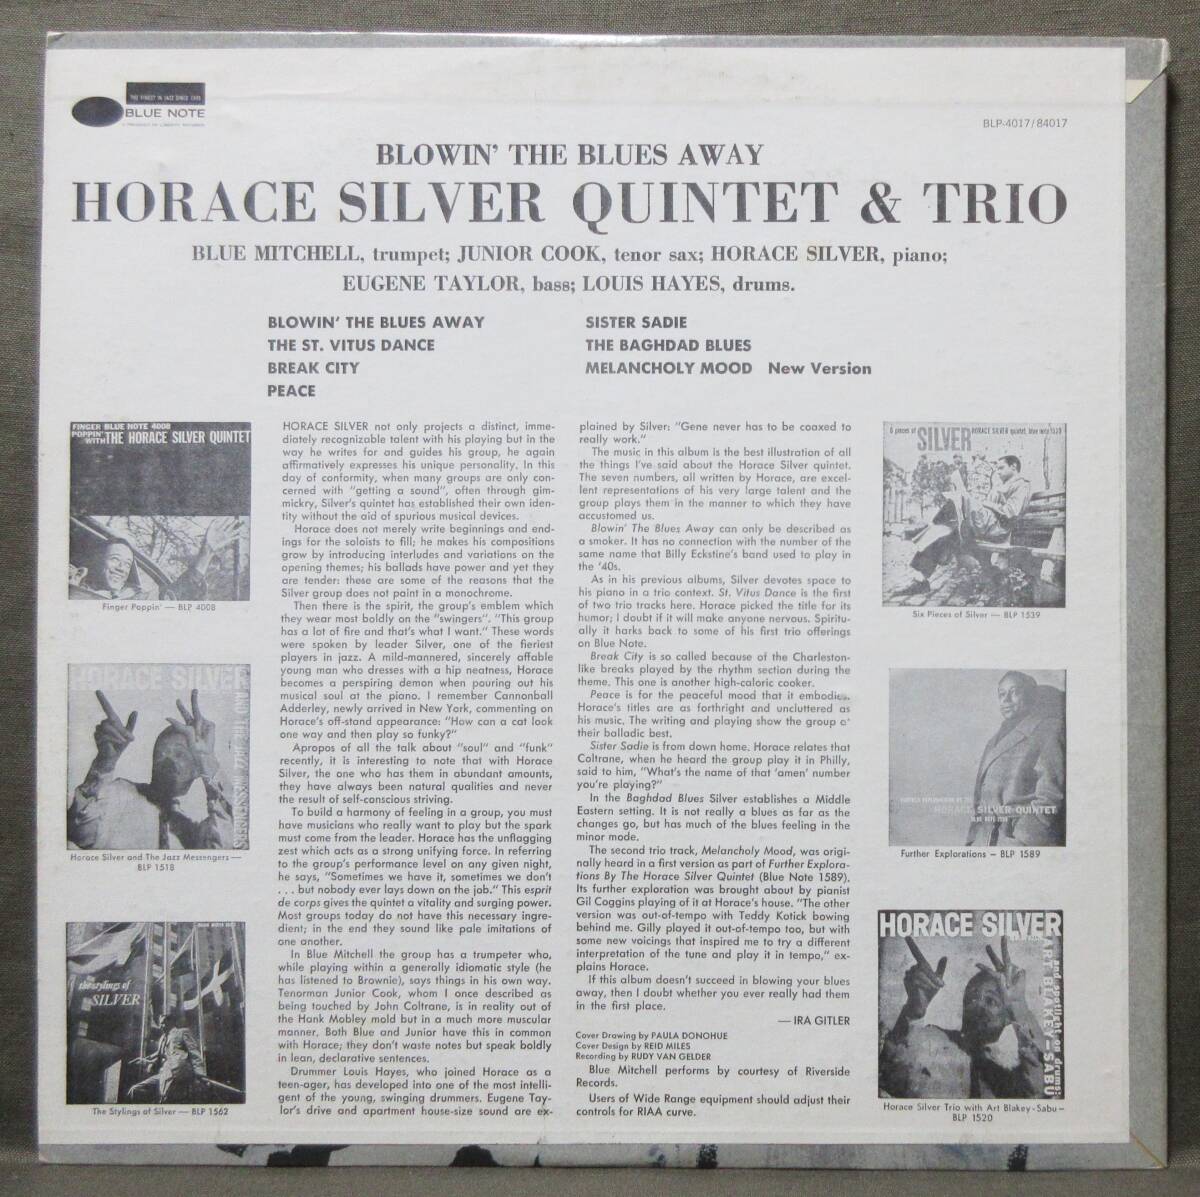 (LP) US/BLUE NOTE(LIBERTY) HORACE SILVER [BLOWIN' THE BLUES AWAY] RVG刻印有り/ホレスシルヴァー/Blue Mitchell/Junior Cook//BST84017の画像2